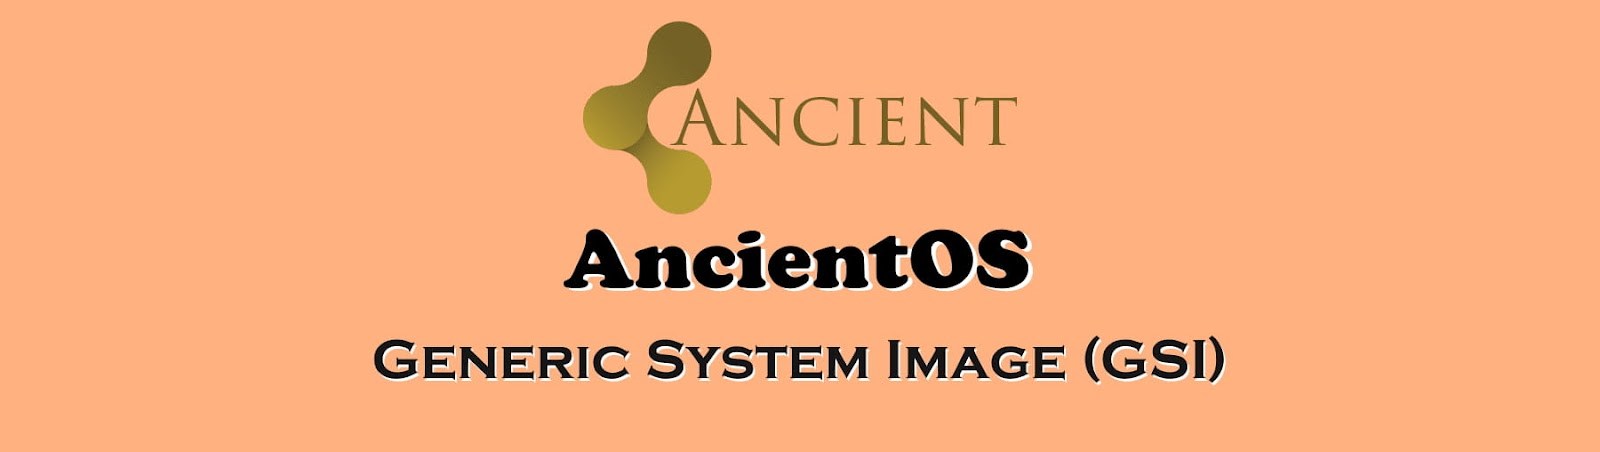 AncientOS Android Generic System Image Illustration Banner